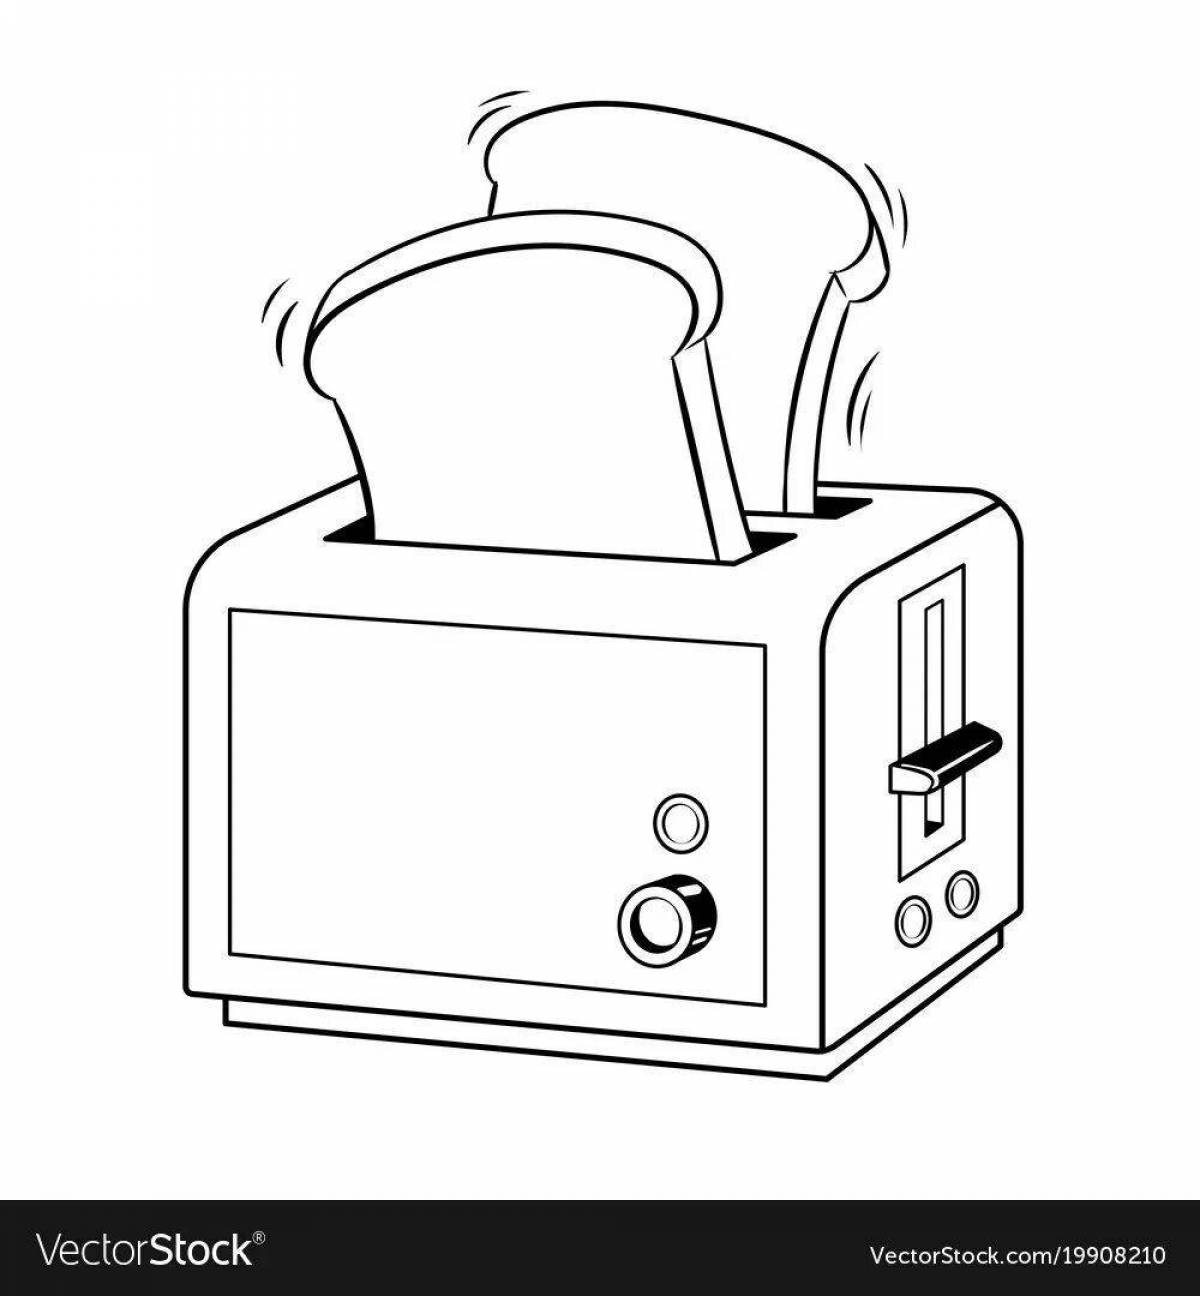 Shiny toaster coloring page